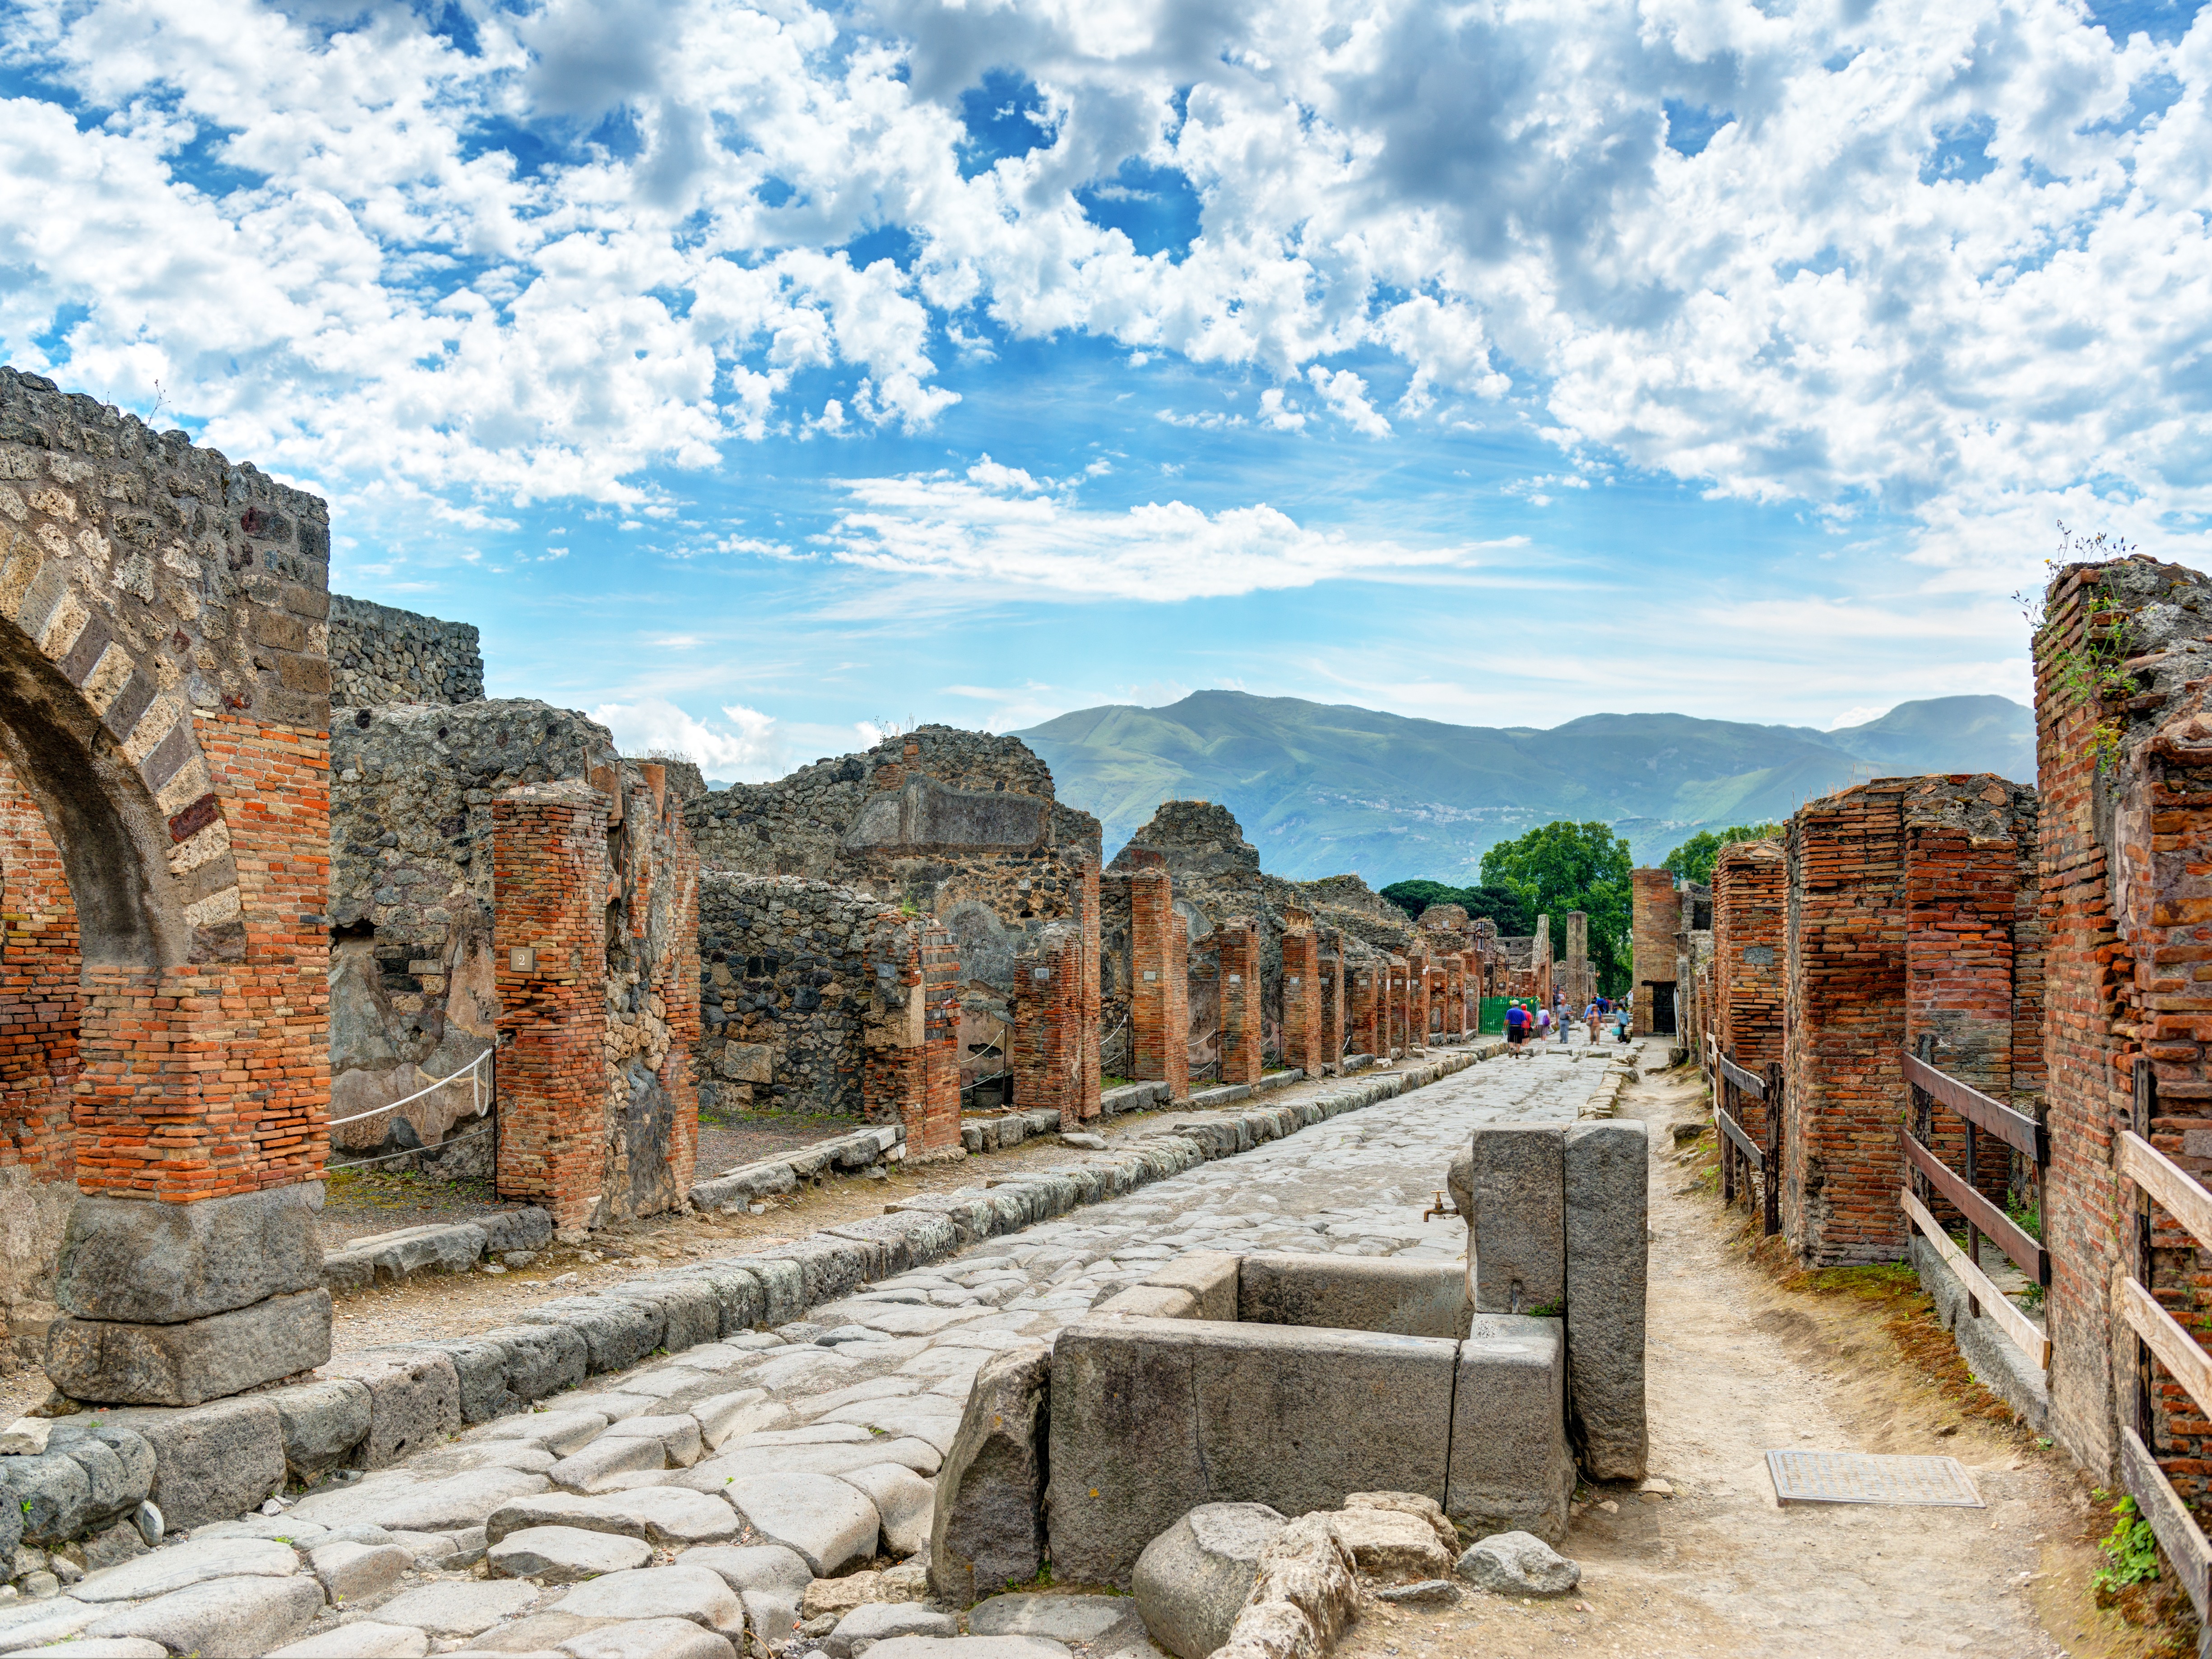 these-pictures-will-make-you-want-to-visit-pompeii-which-was-covered-under-a-layer-of-volcanic-ash-thousands-of-years-ago